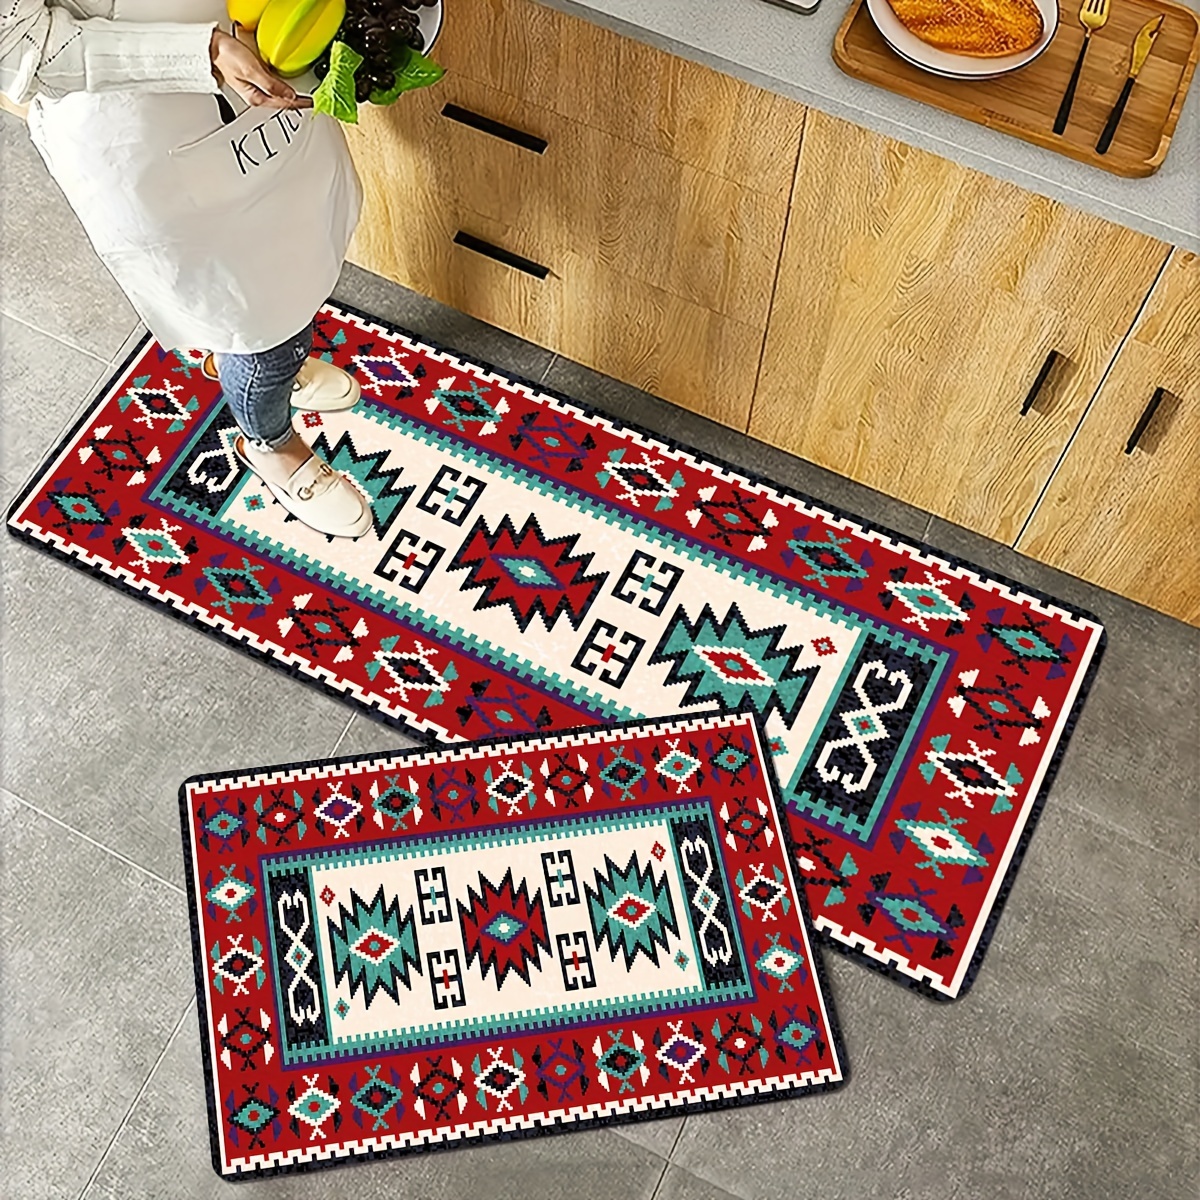 

1pc, Non-slip Oil-proof Moroccan Tribal Area Rugs, Wear-resistant And Stain Resistant Kitchen Floor Mat, Suitable For Kitchen, Living Room, Entrance, And Home Decor